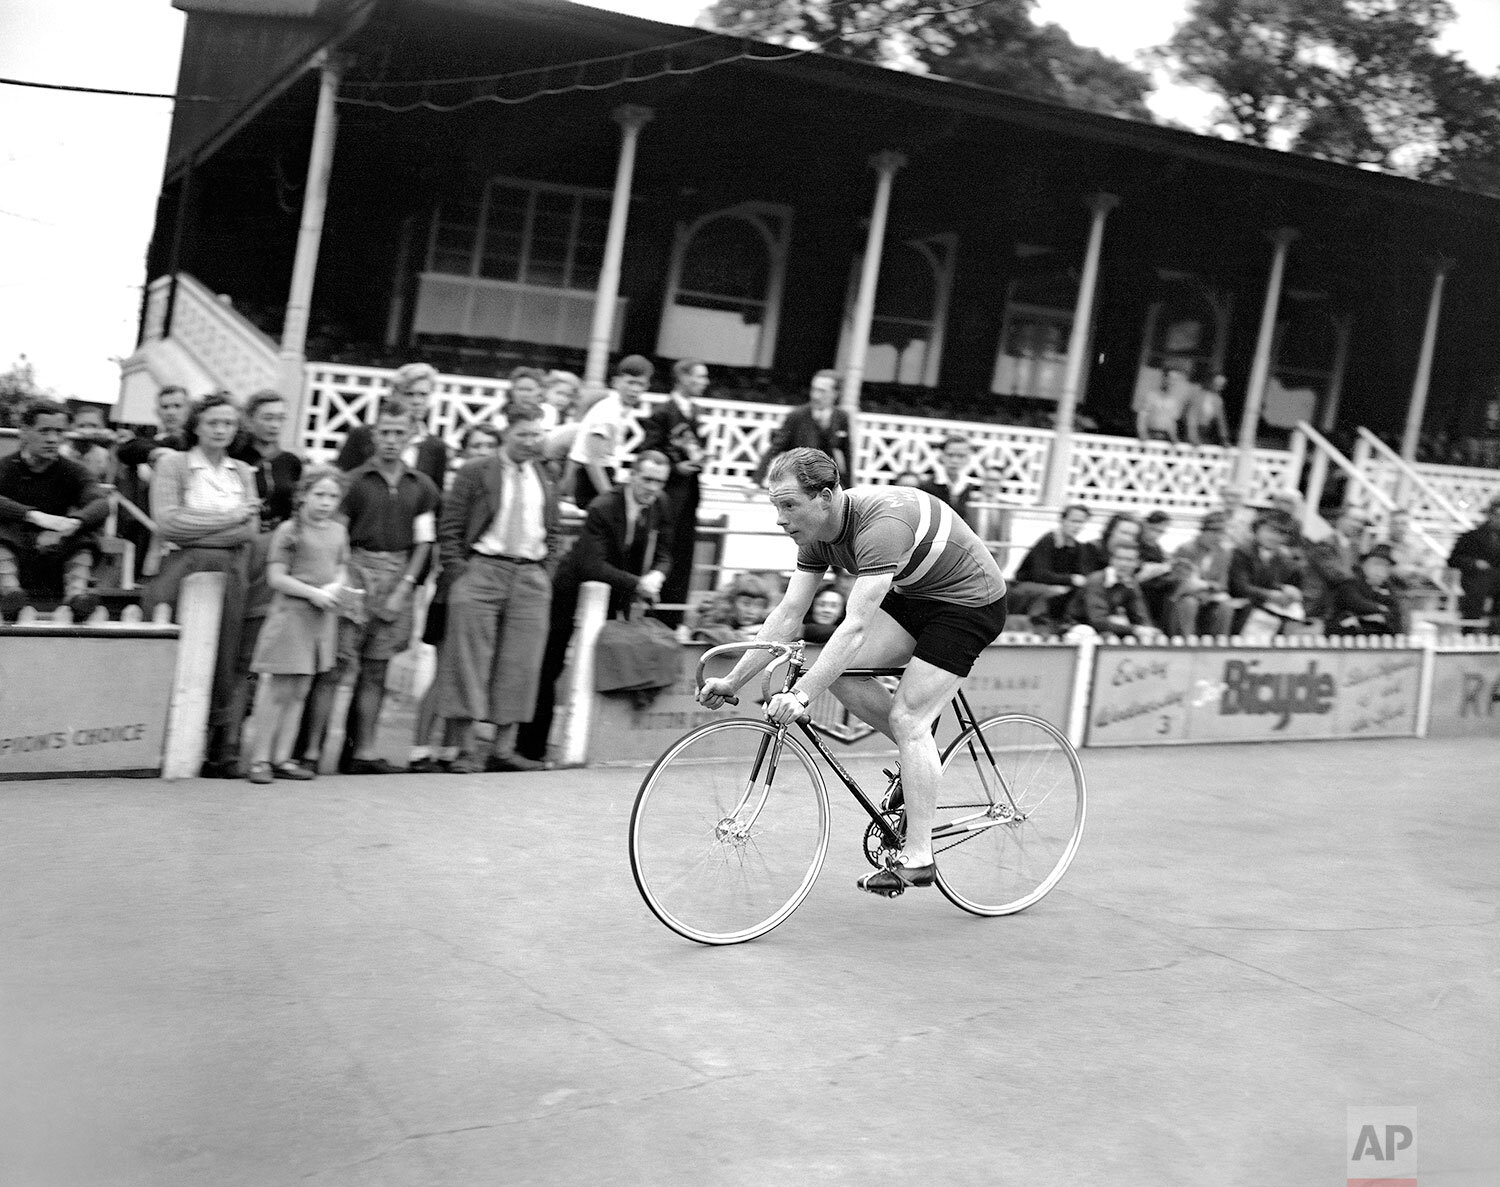  Reg Harris, British world amateur sprint cyclist champion, seen on his racing machine, on the Olympic cycling tracks at Herne Hill Velodrome in London, United Kingdom, on August 4, 1948.  (AP Photo/John Rider-Rider) 